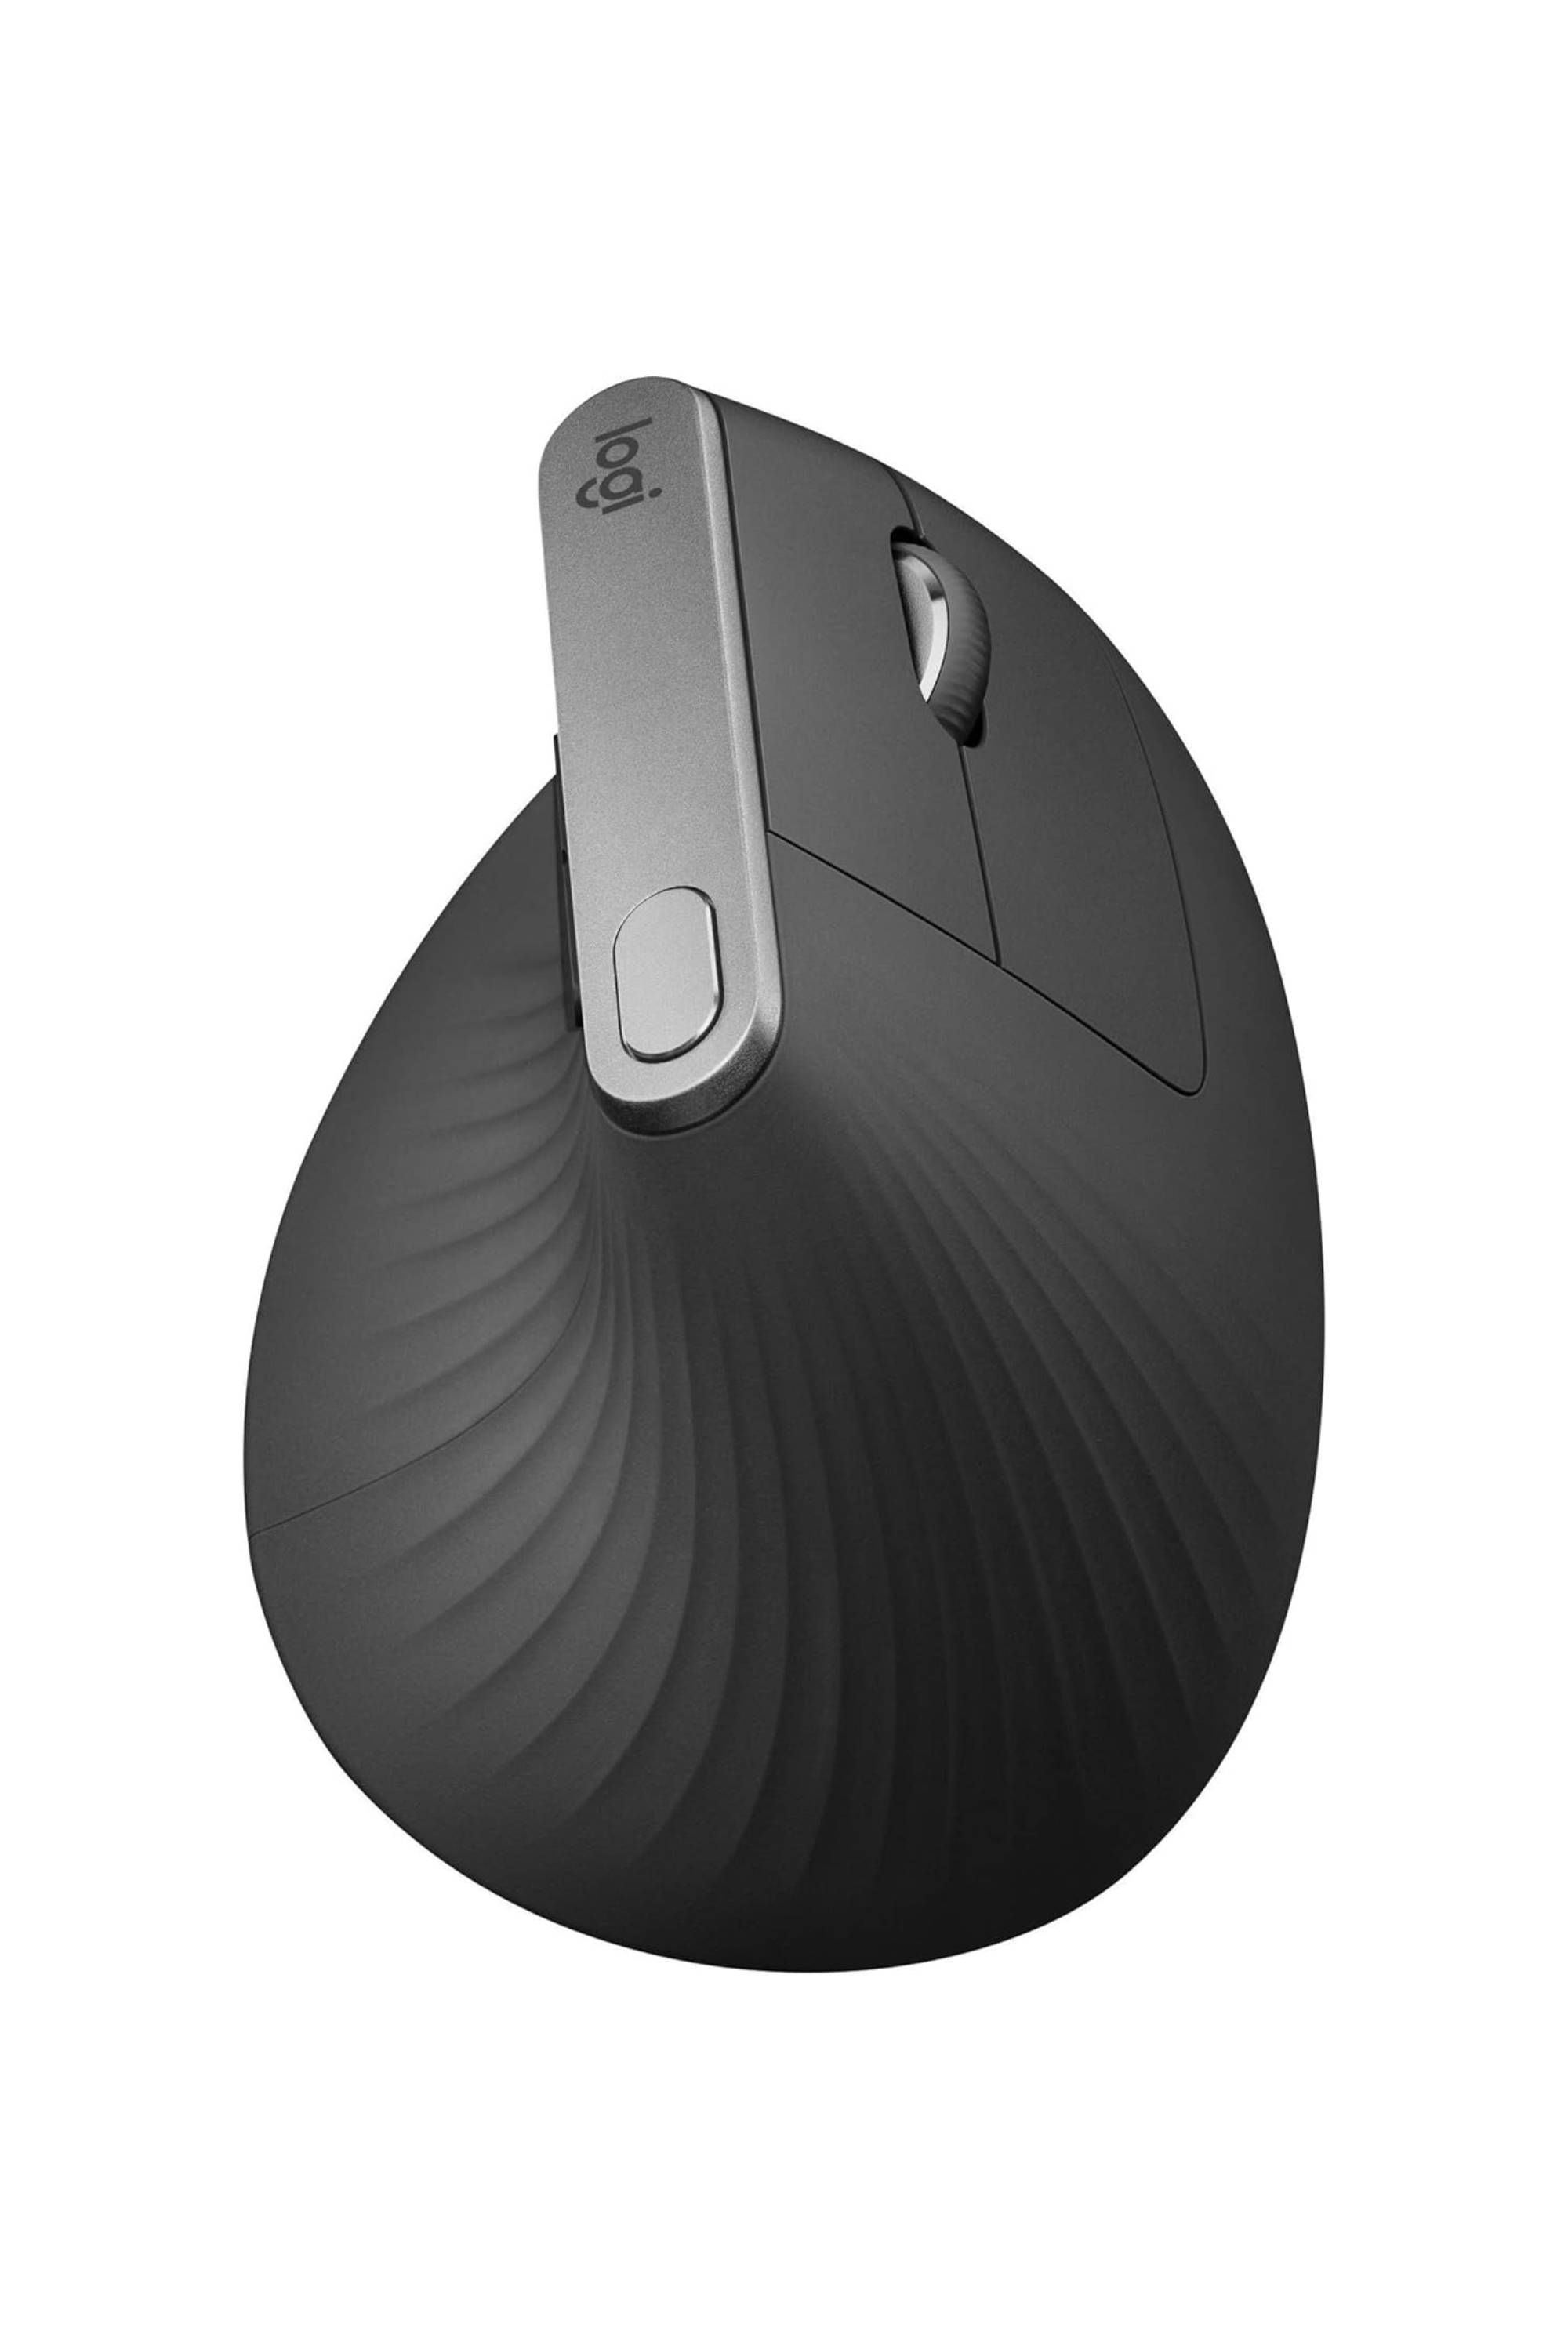  Wireless Vertical Mouse, Ergonomic Wireless Mouse 2.4G High  Precision Optical Mice, Reduce Wrist Pain (for Small Hands) : Electronics